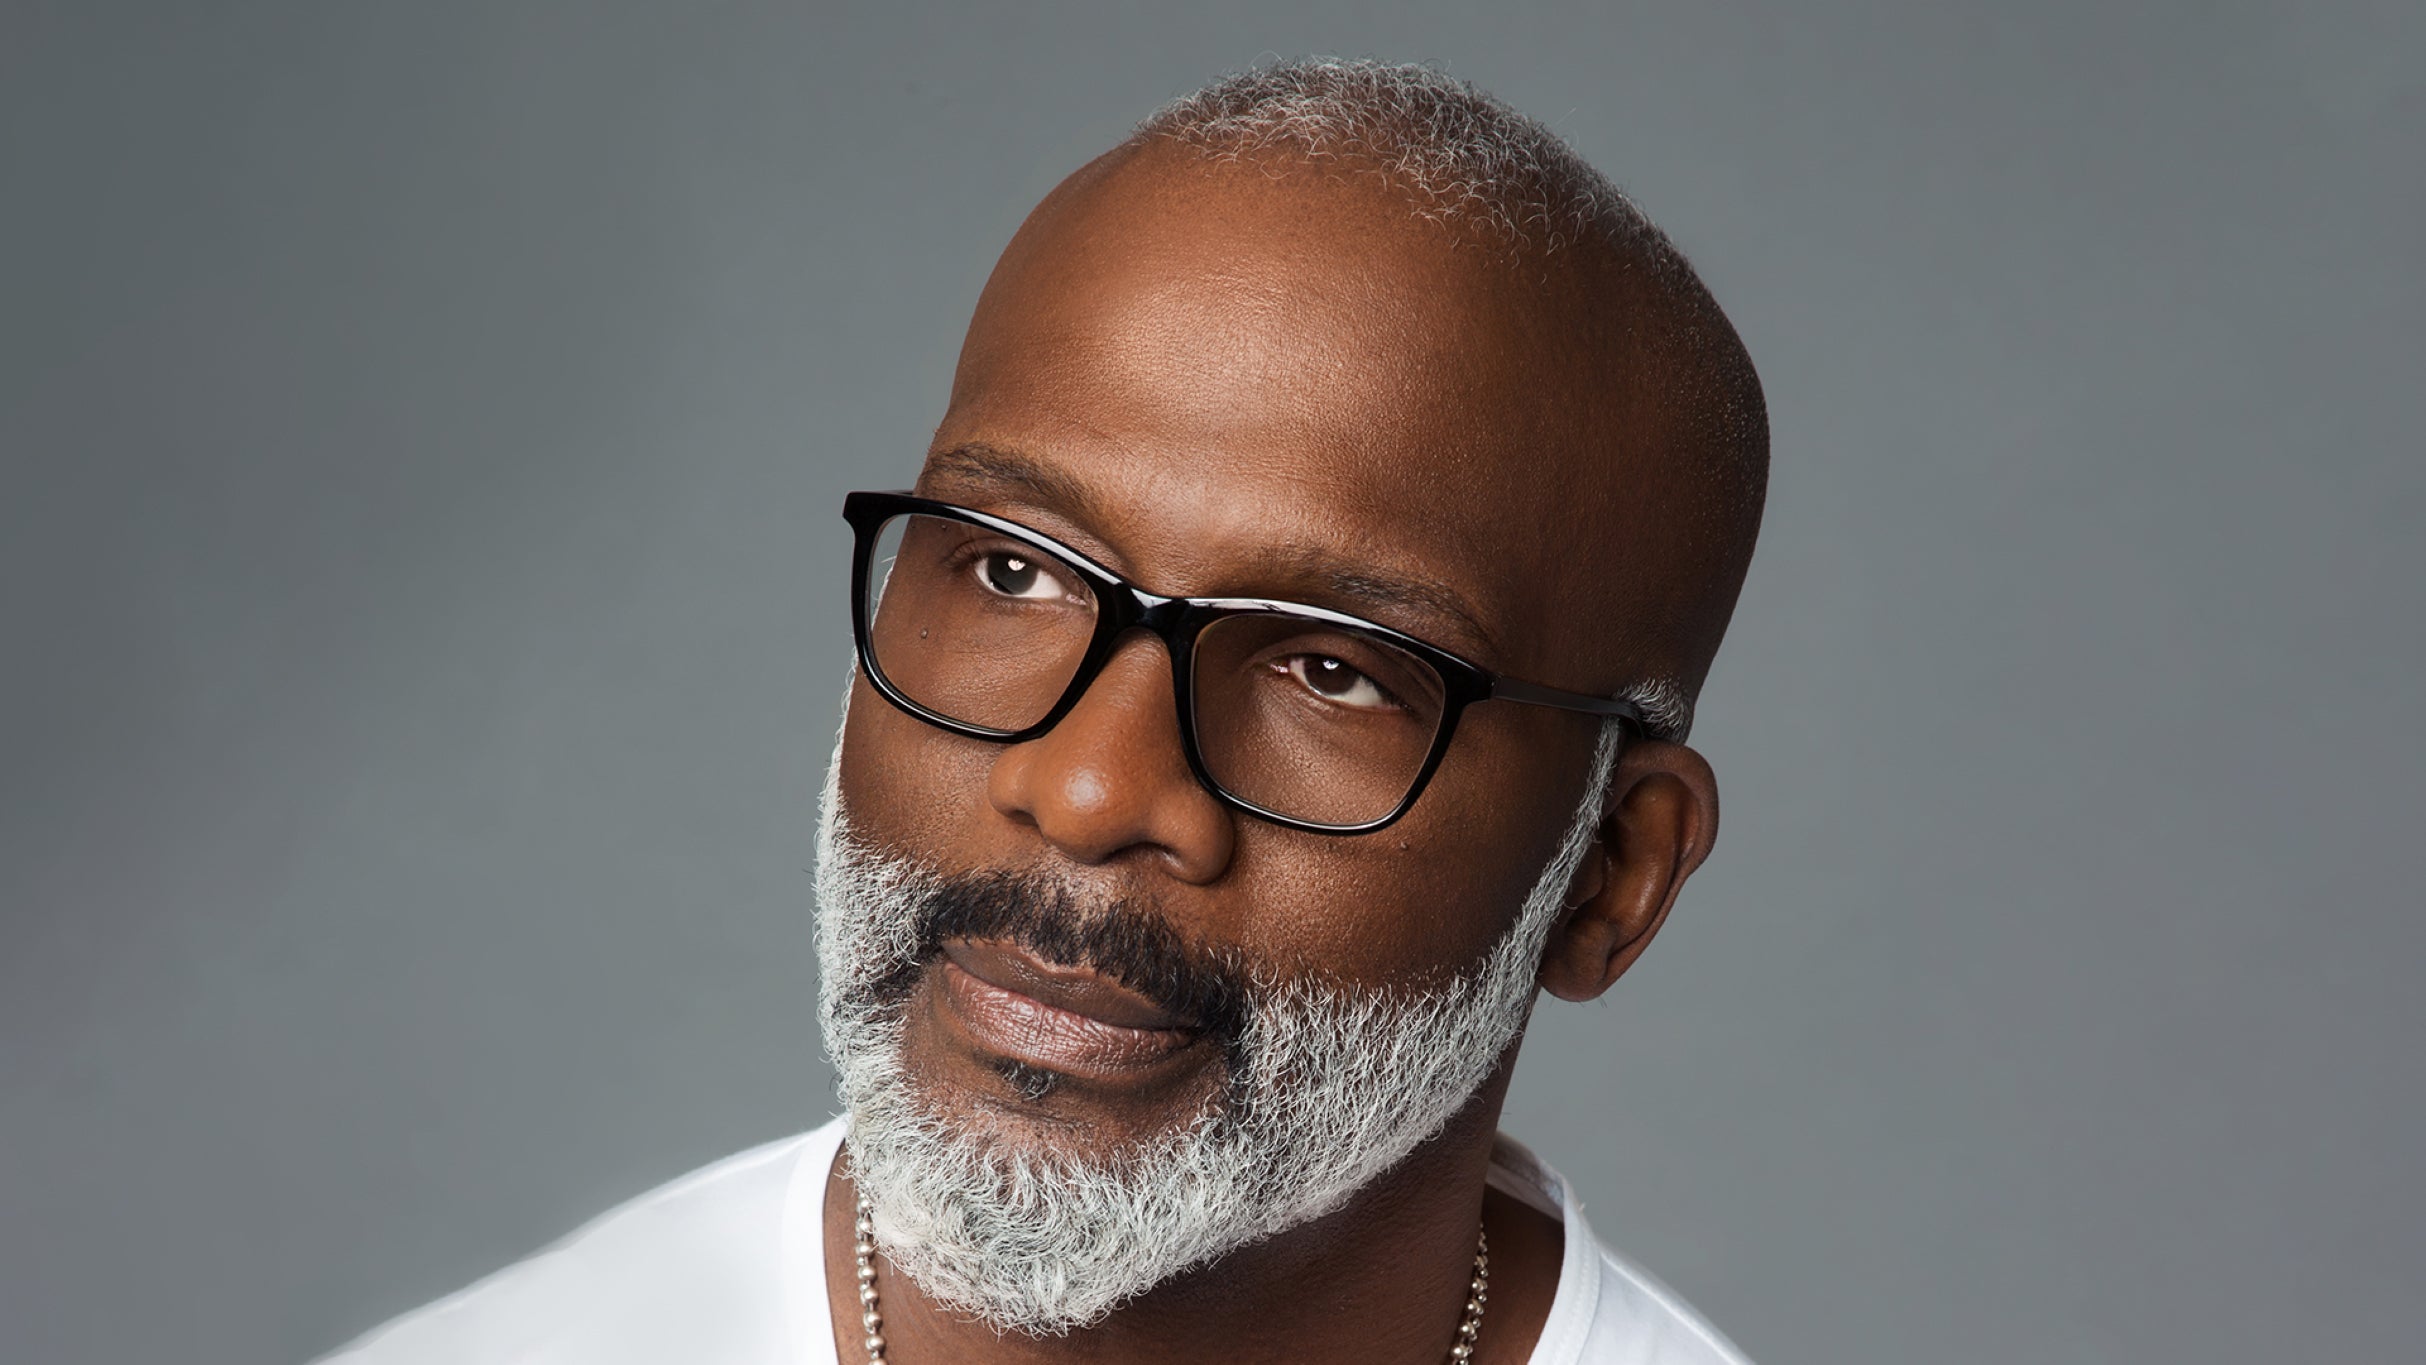 Bebe Winans in Westbury promo photo for Official Platinum presale offer code